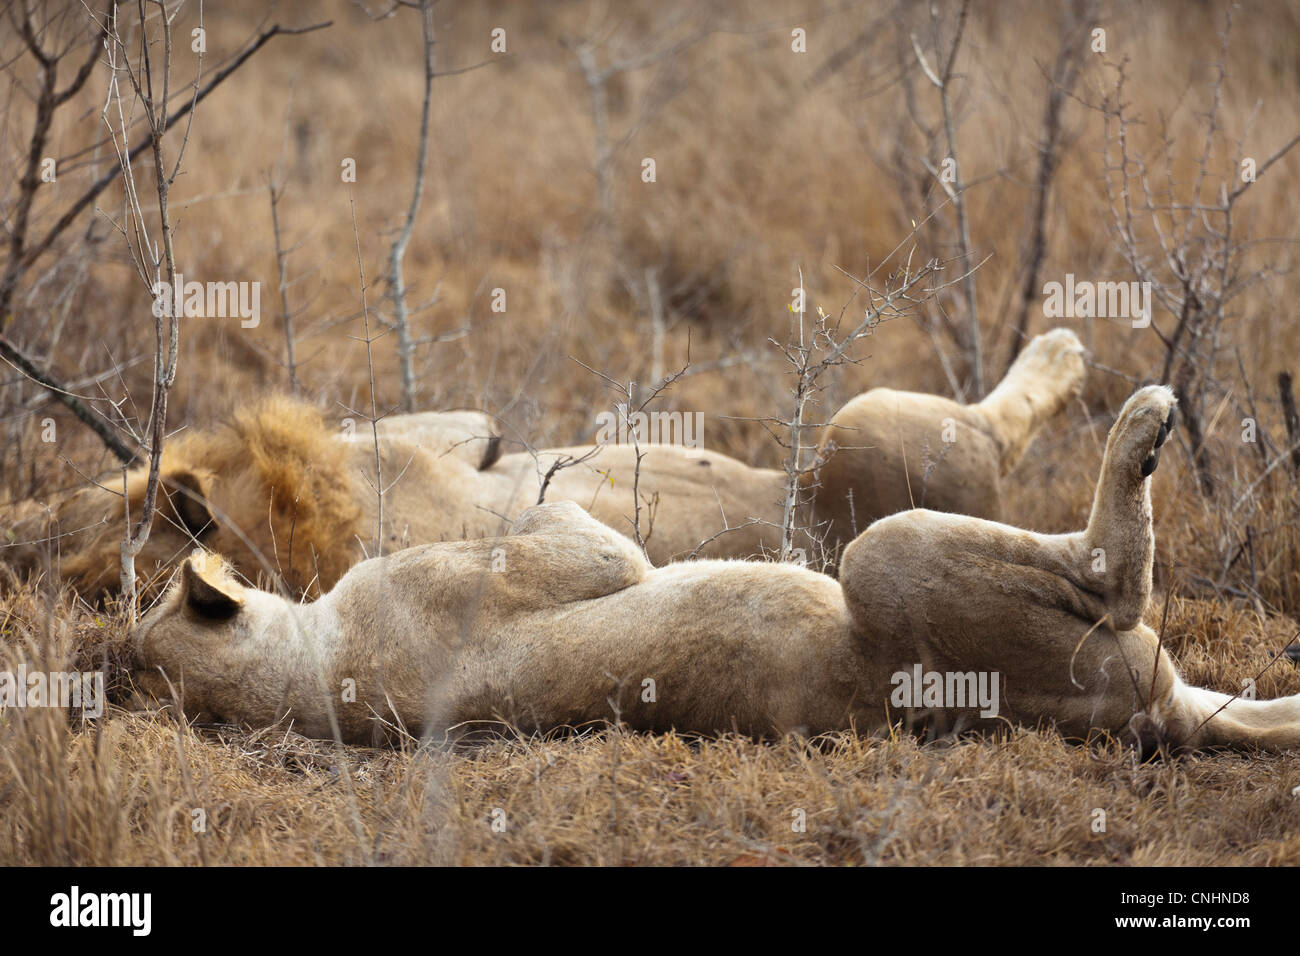 A male and female lion lying side by side Stock Photo